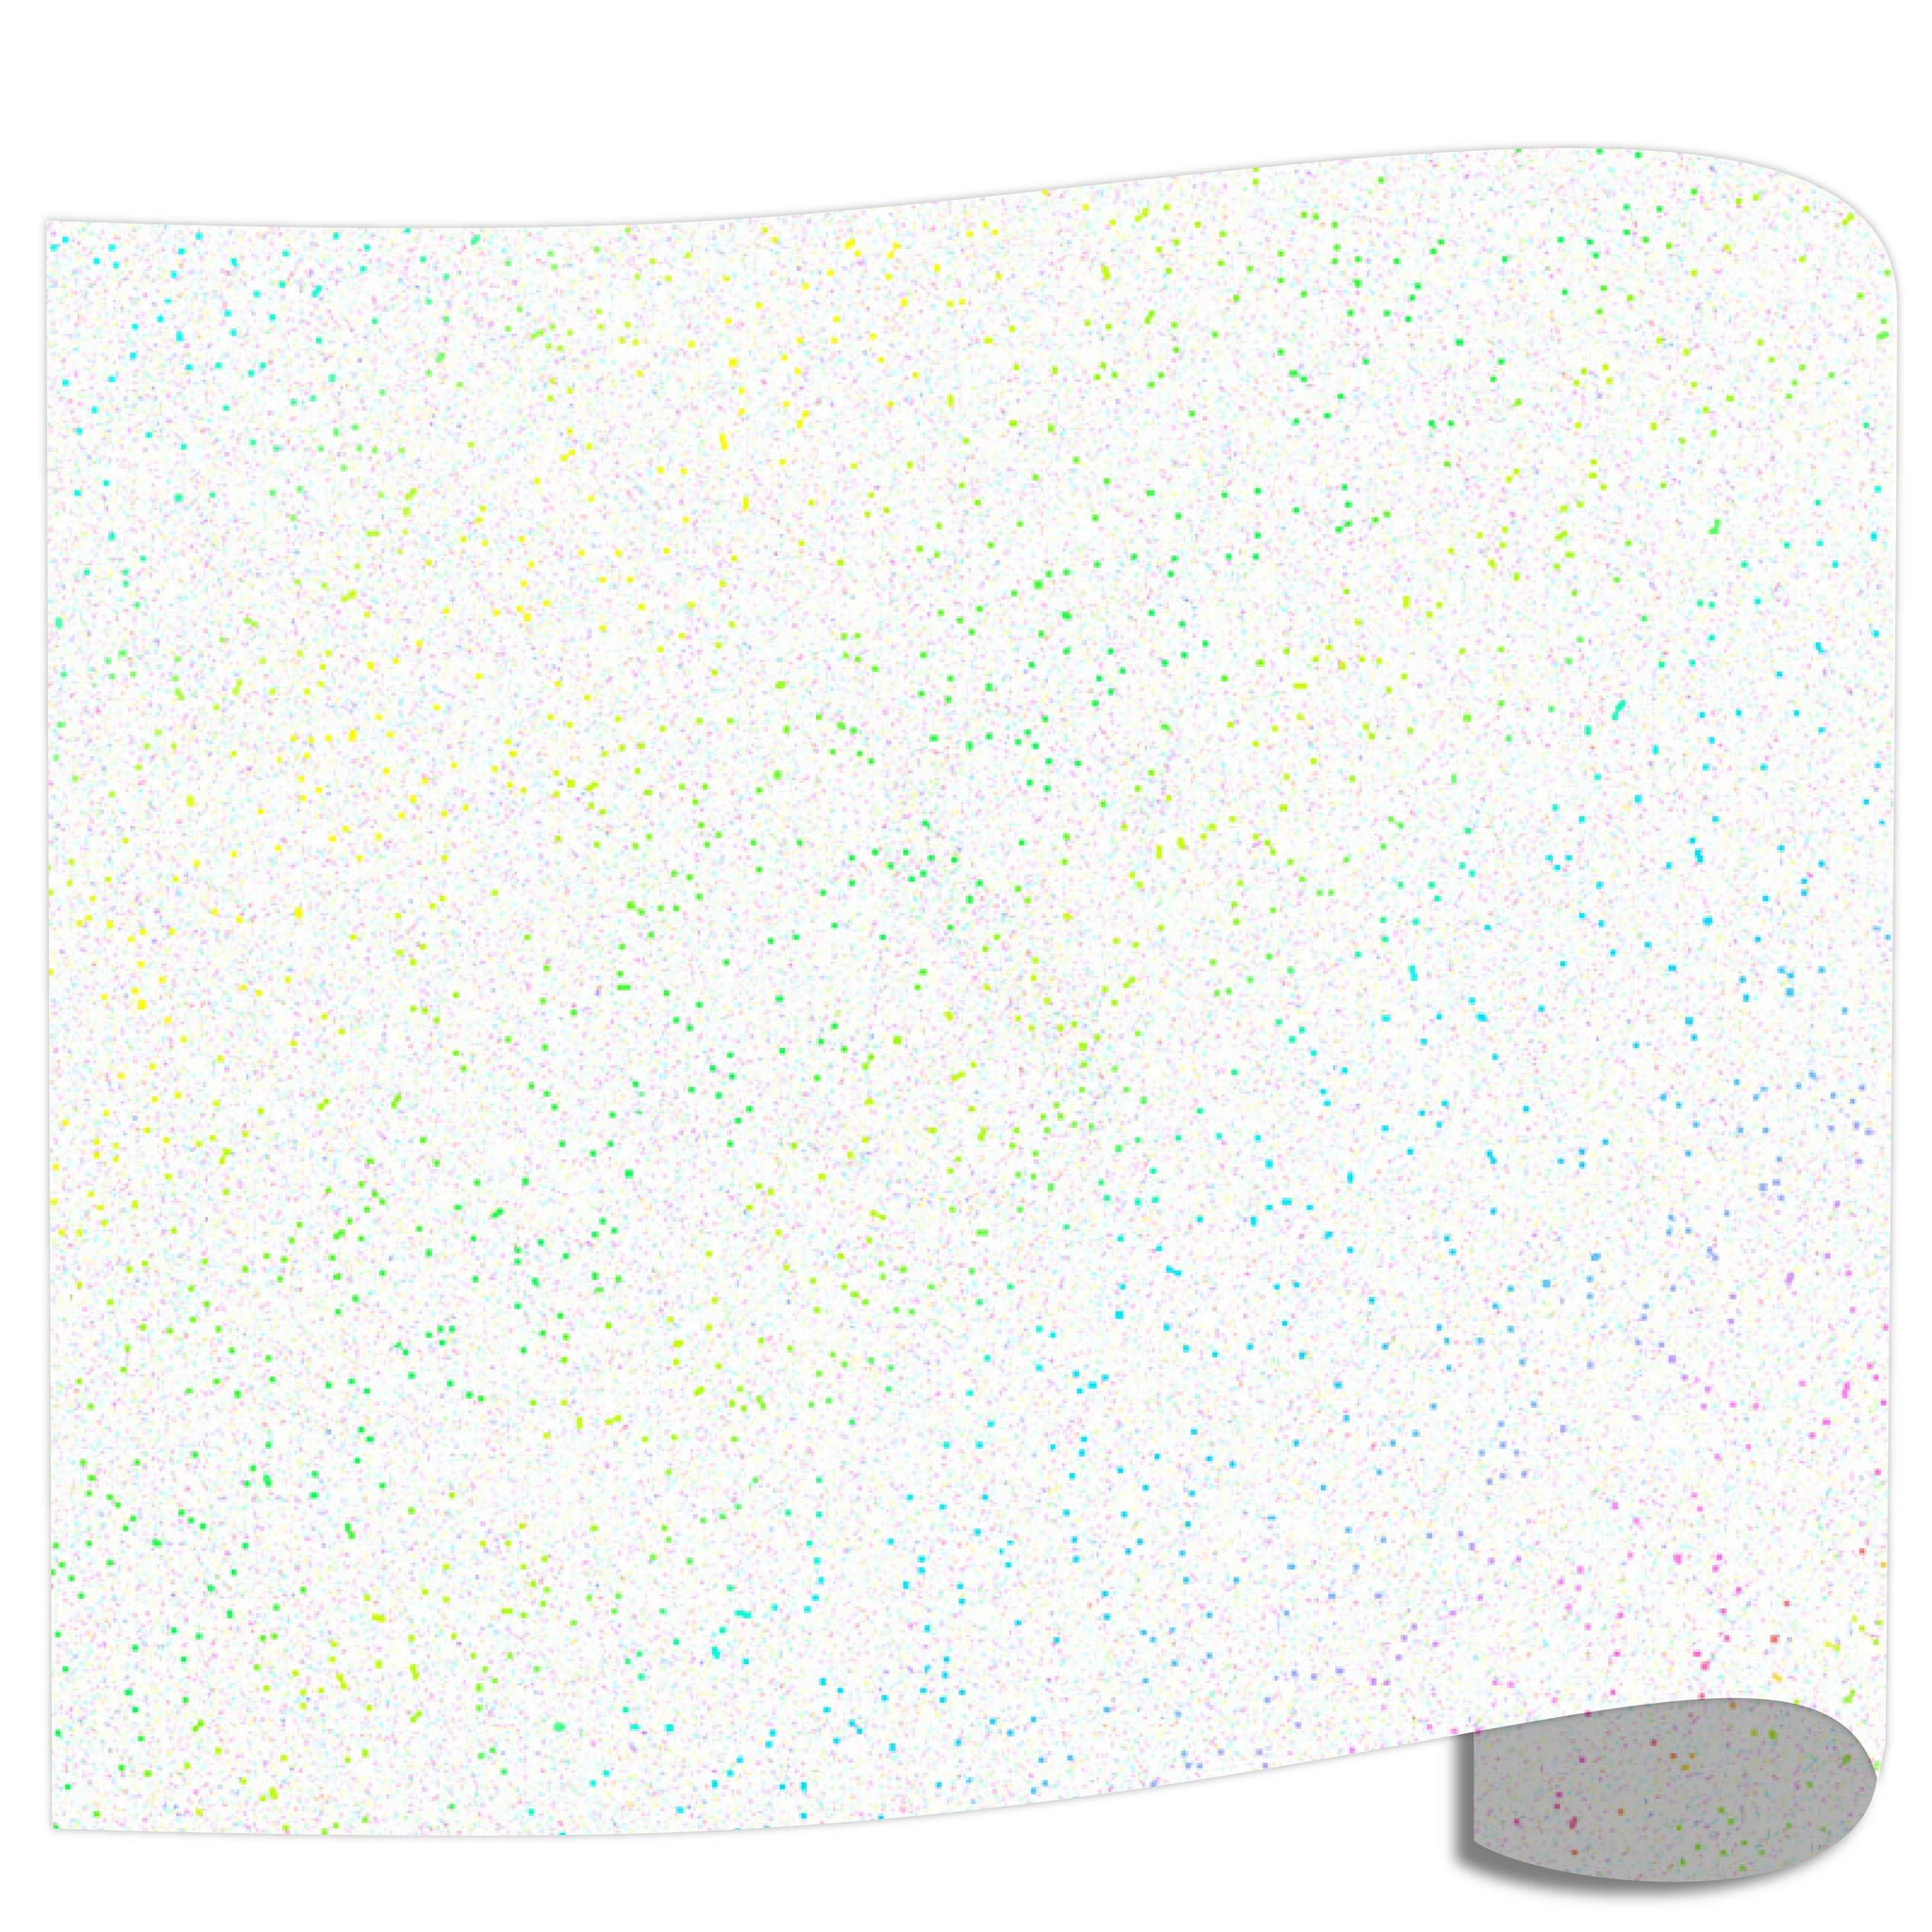  FANSGUAR Rainbow White Glitter HTV Heat Transfer Vinyl Bundle 8  Sheets-12x12 Iron on for DIY Shirts Gifts : Arts, Crafts & Sewing